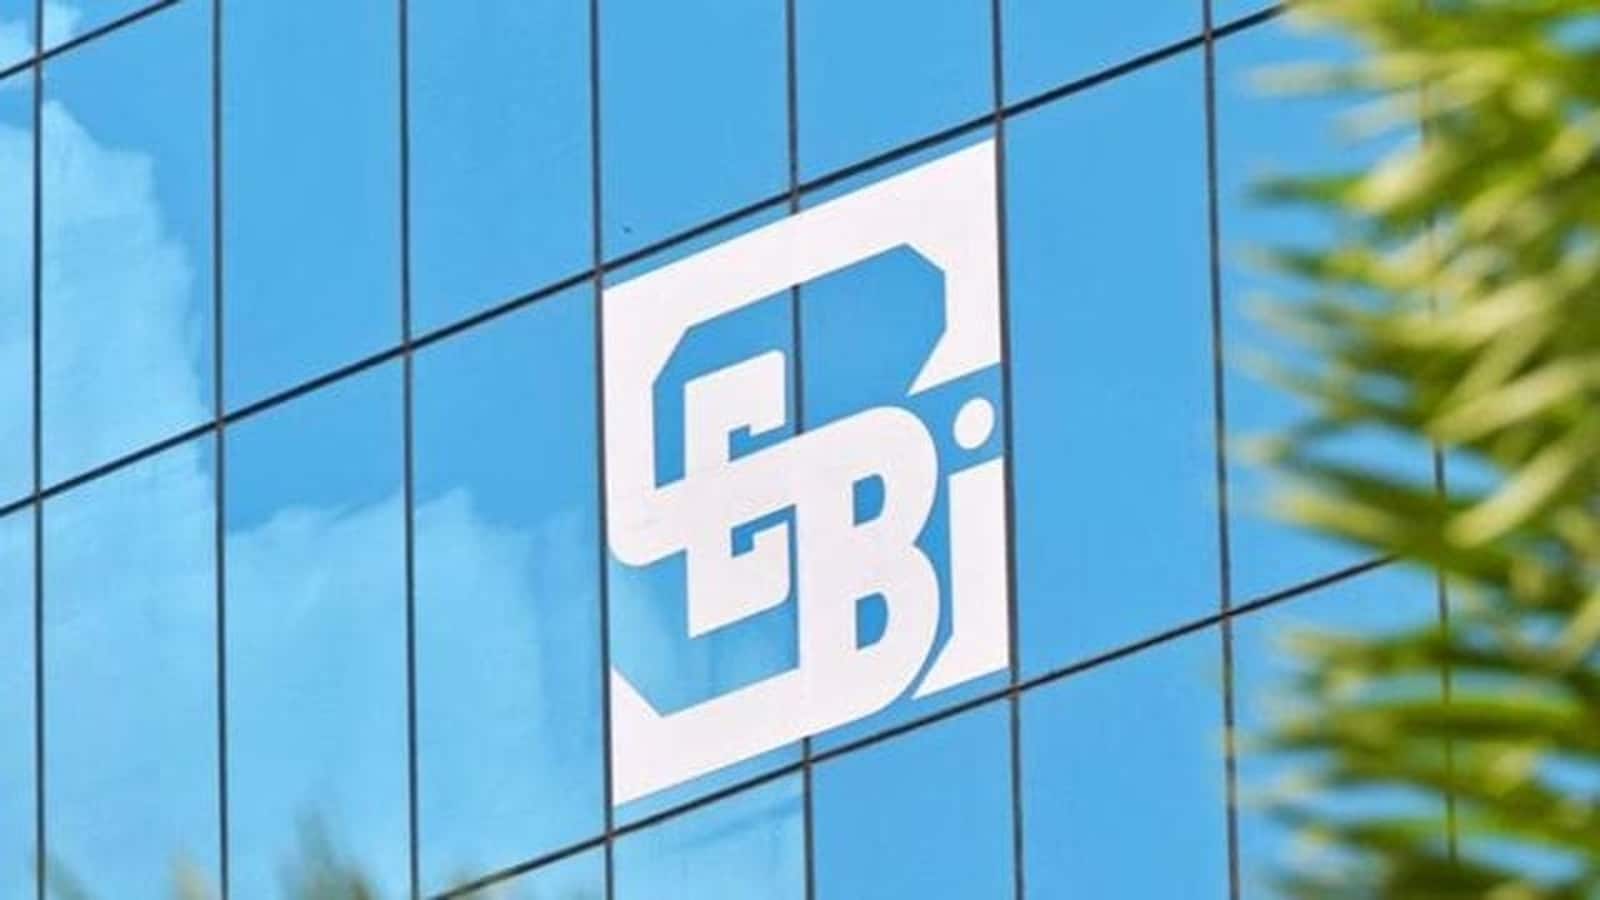 SEBI relaxes KYC norms to simplify risk management framework. Check details